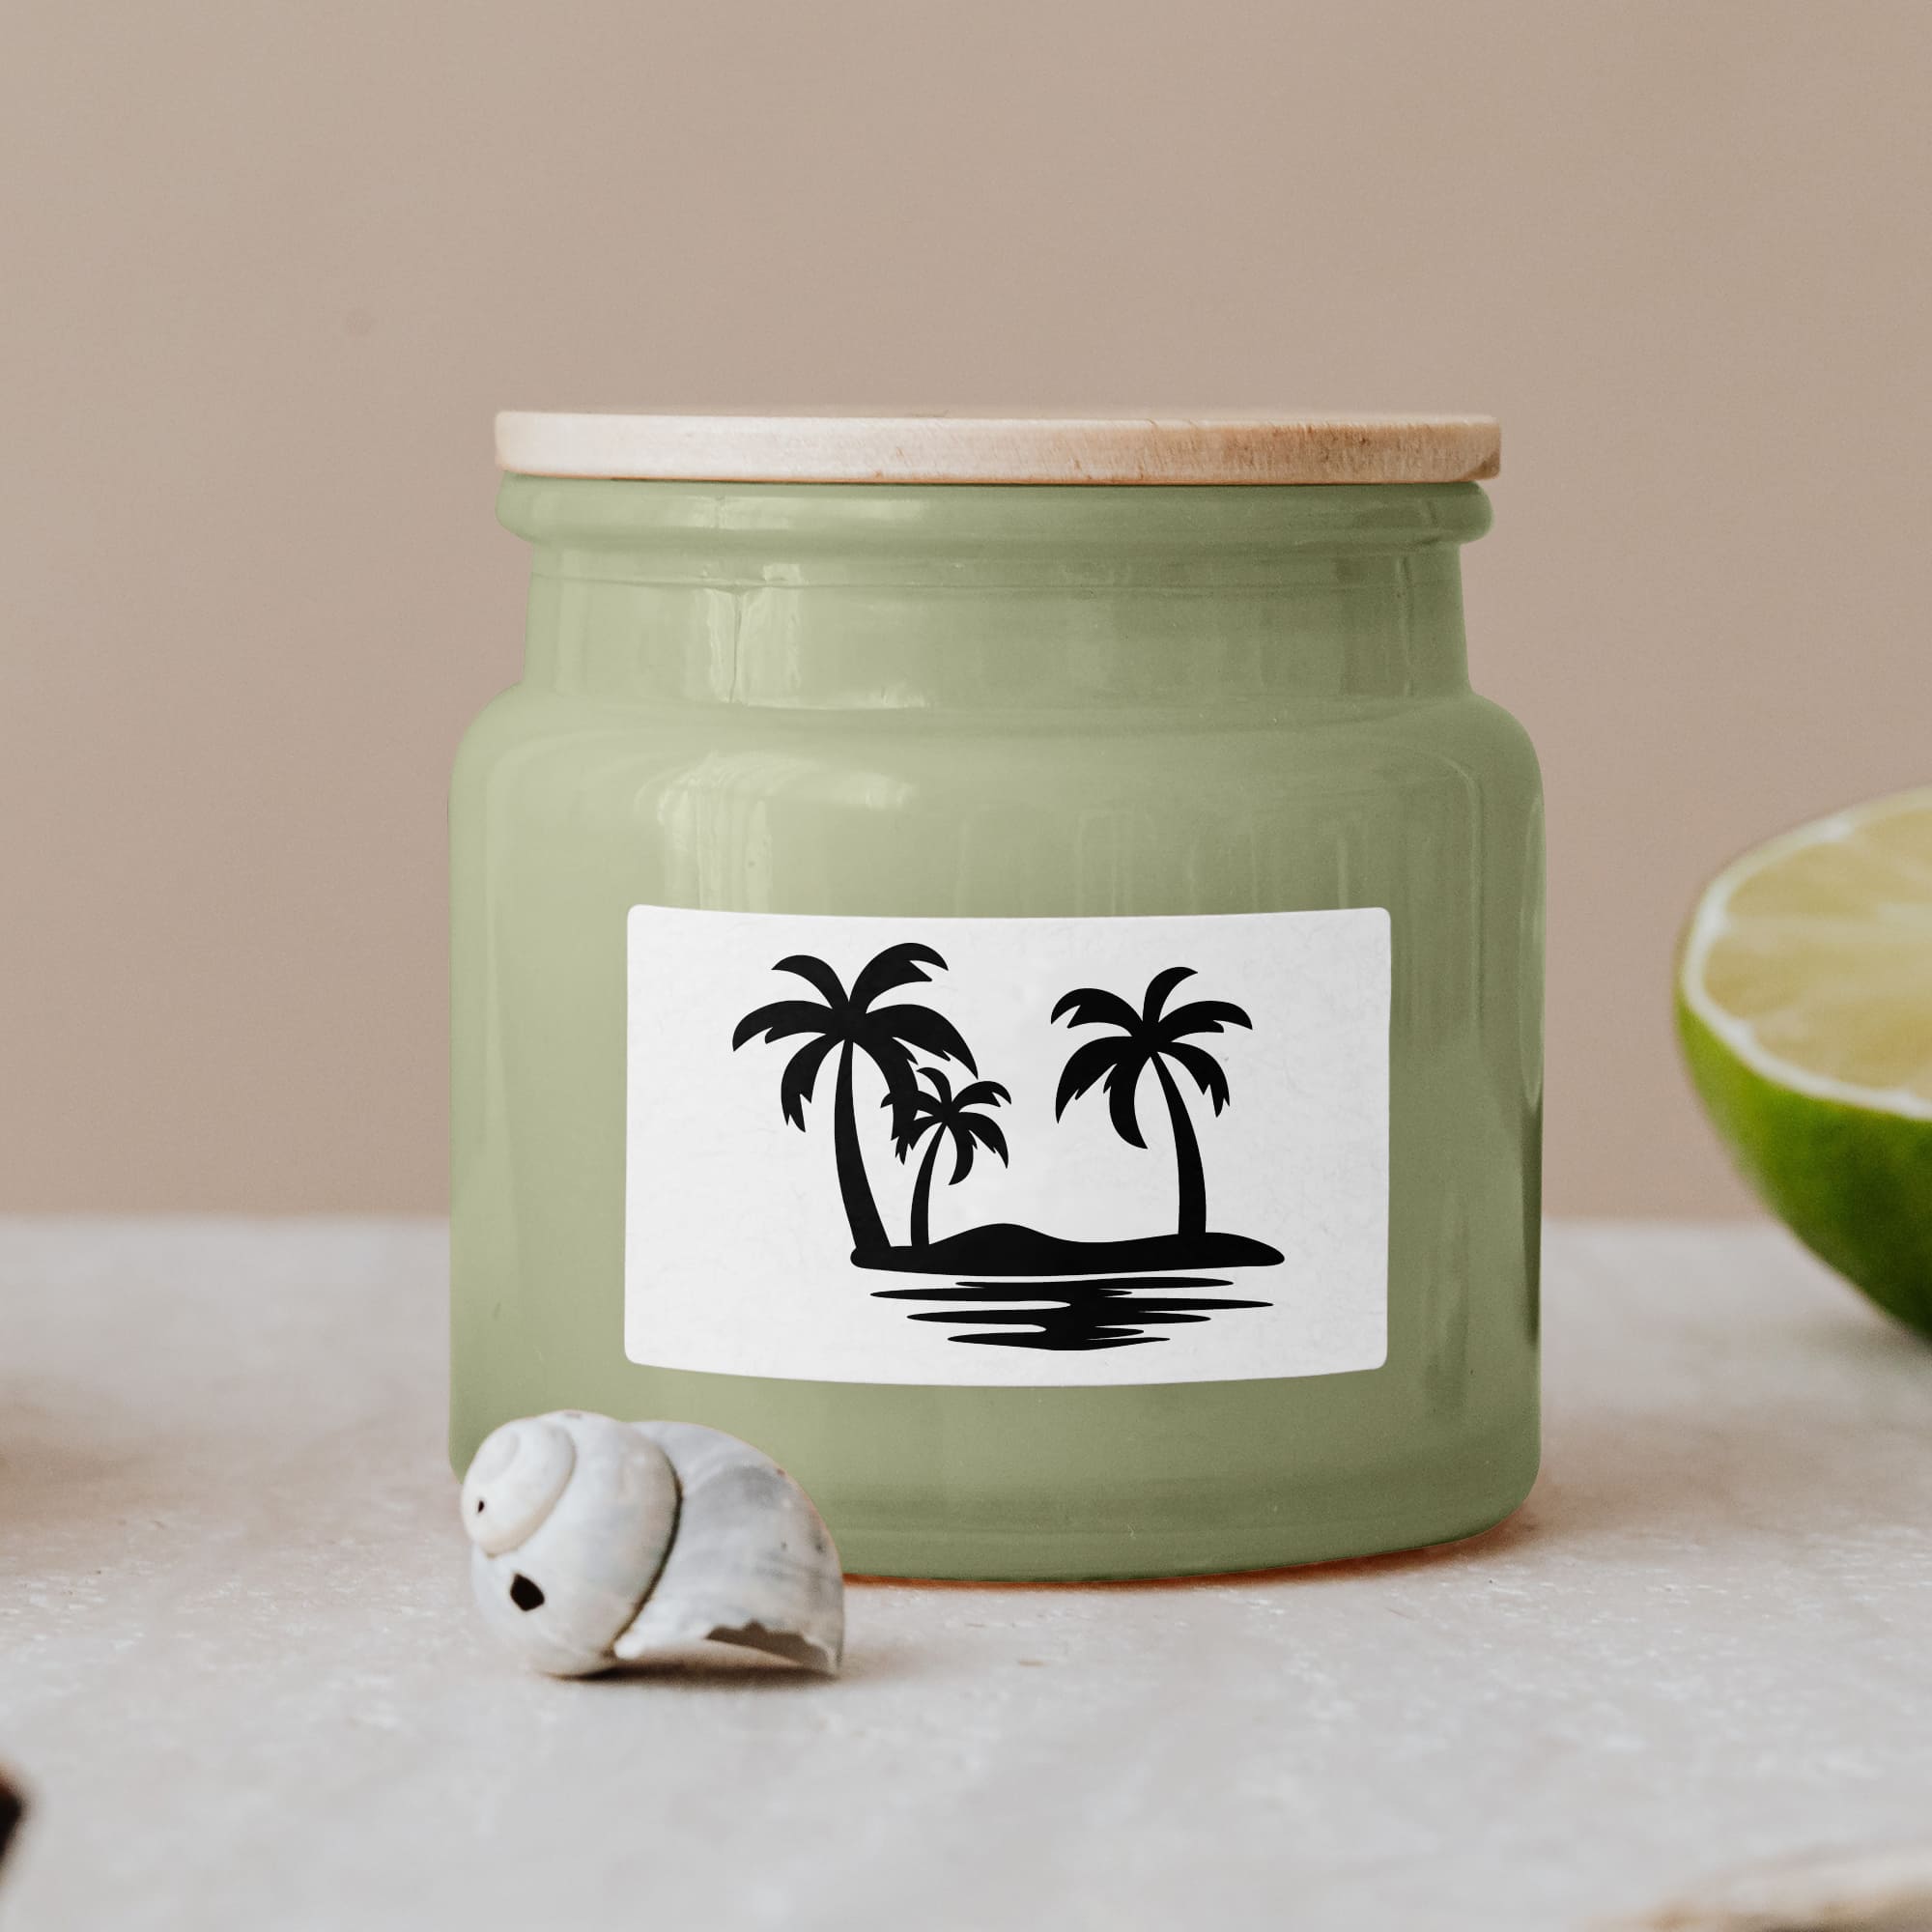 Palm tree silhouettes are painted on the olive cream jar.